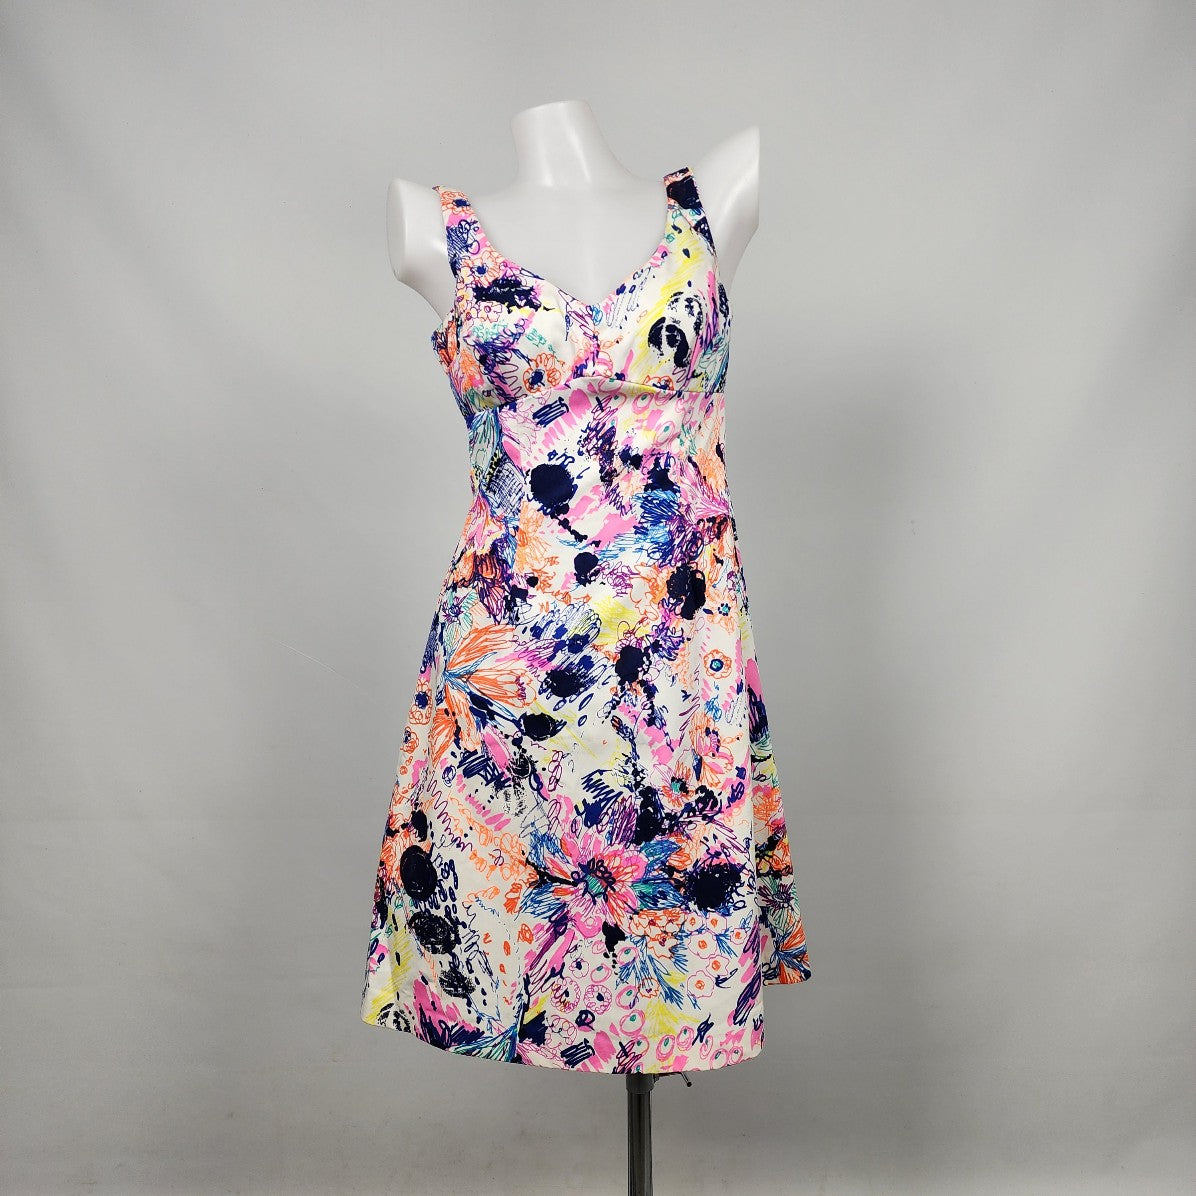 Vintage Colorful Printed Floral Cotton Sleeveless Dress Size S